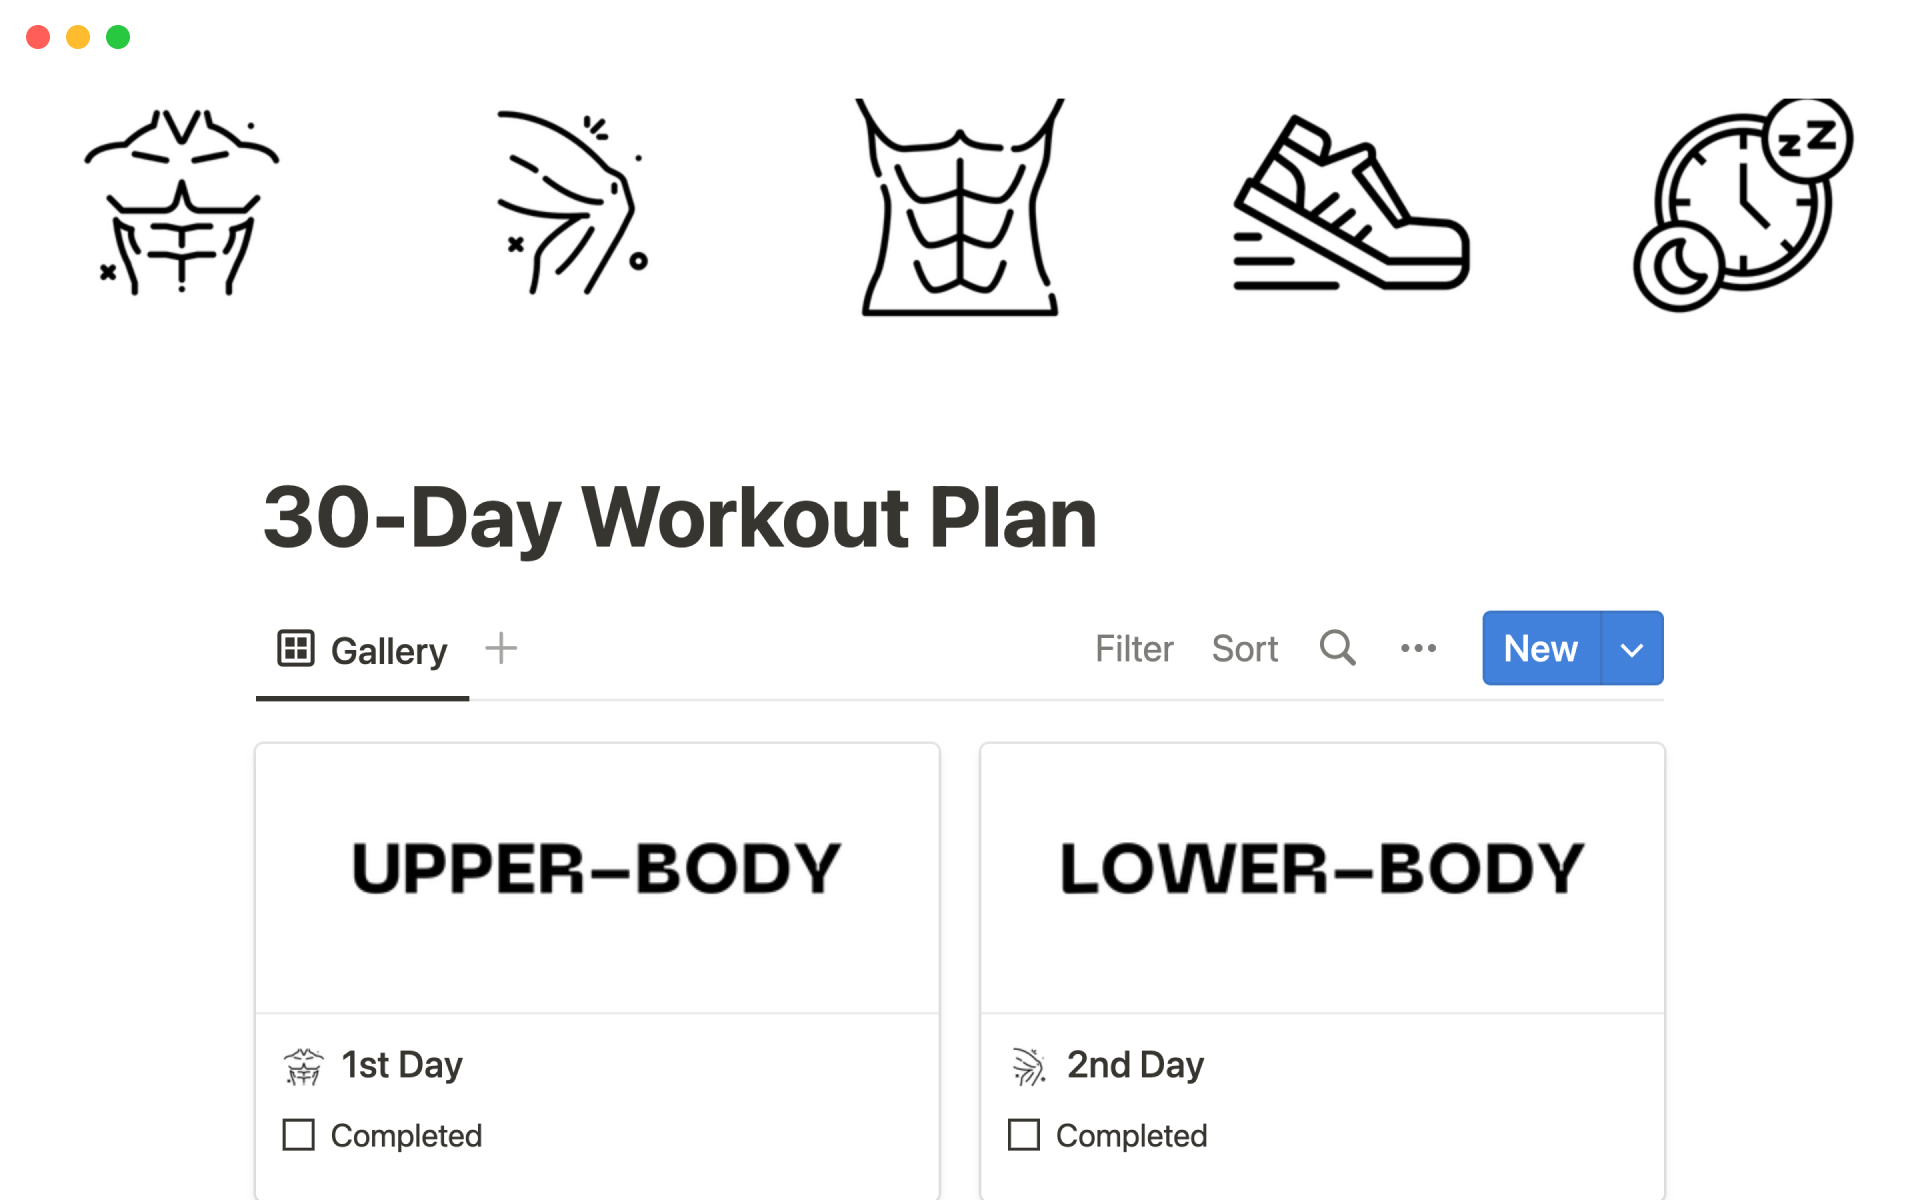 A 30 day workout plan designed to help you reach your fitness goals.